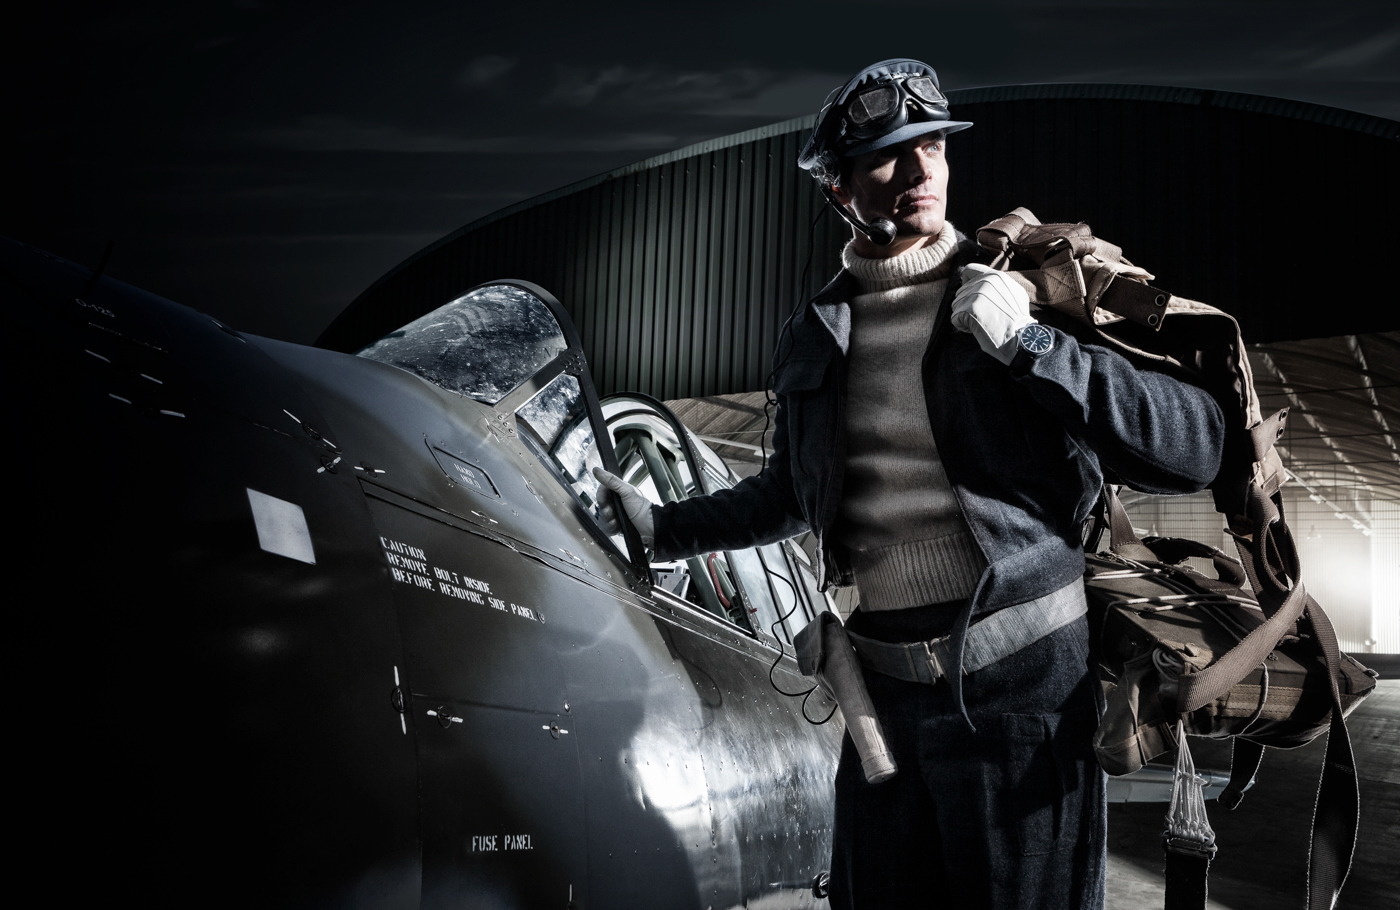 Watches campagne Fashion  planes airplanes airport War Mode airman Photography 